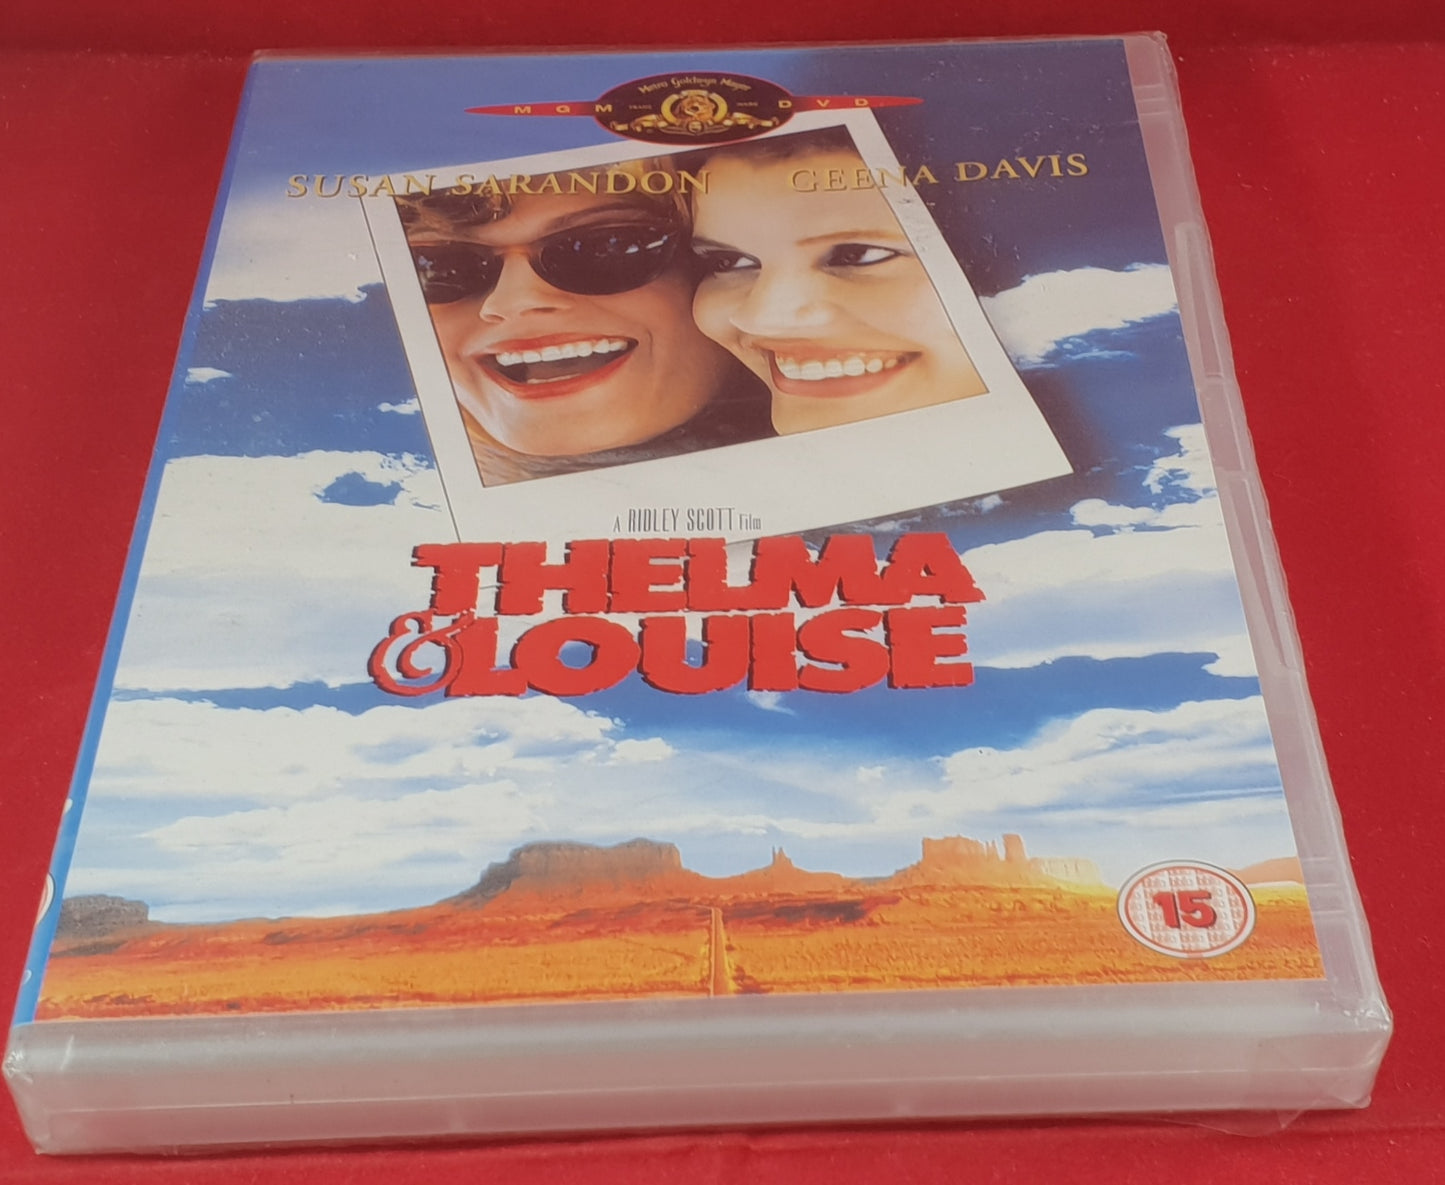 New & Sealed Thelma & Louise DVD